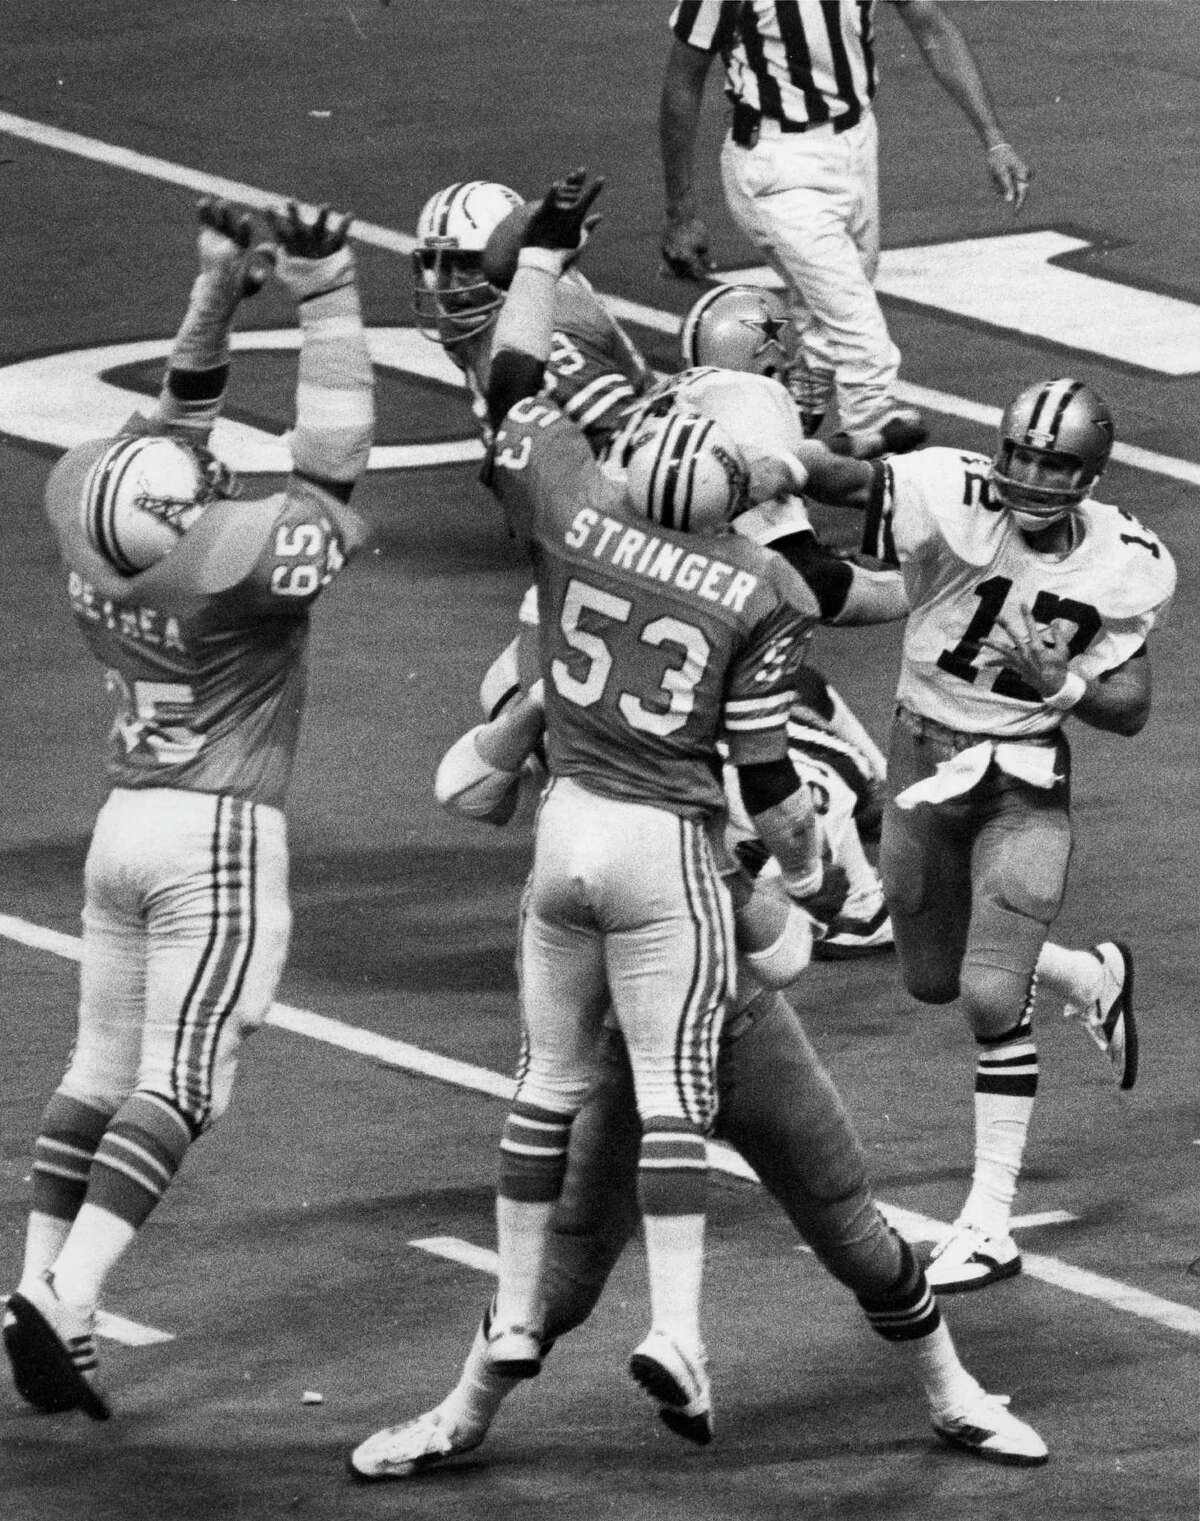 Oilers defenders Elvin Bethea, left, and Art Stringer try to block the passing lanes of Cowboys quarterback Roger Staubach in the 1979 matchup.